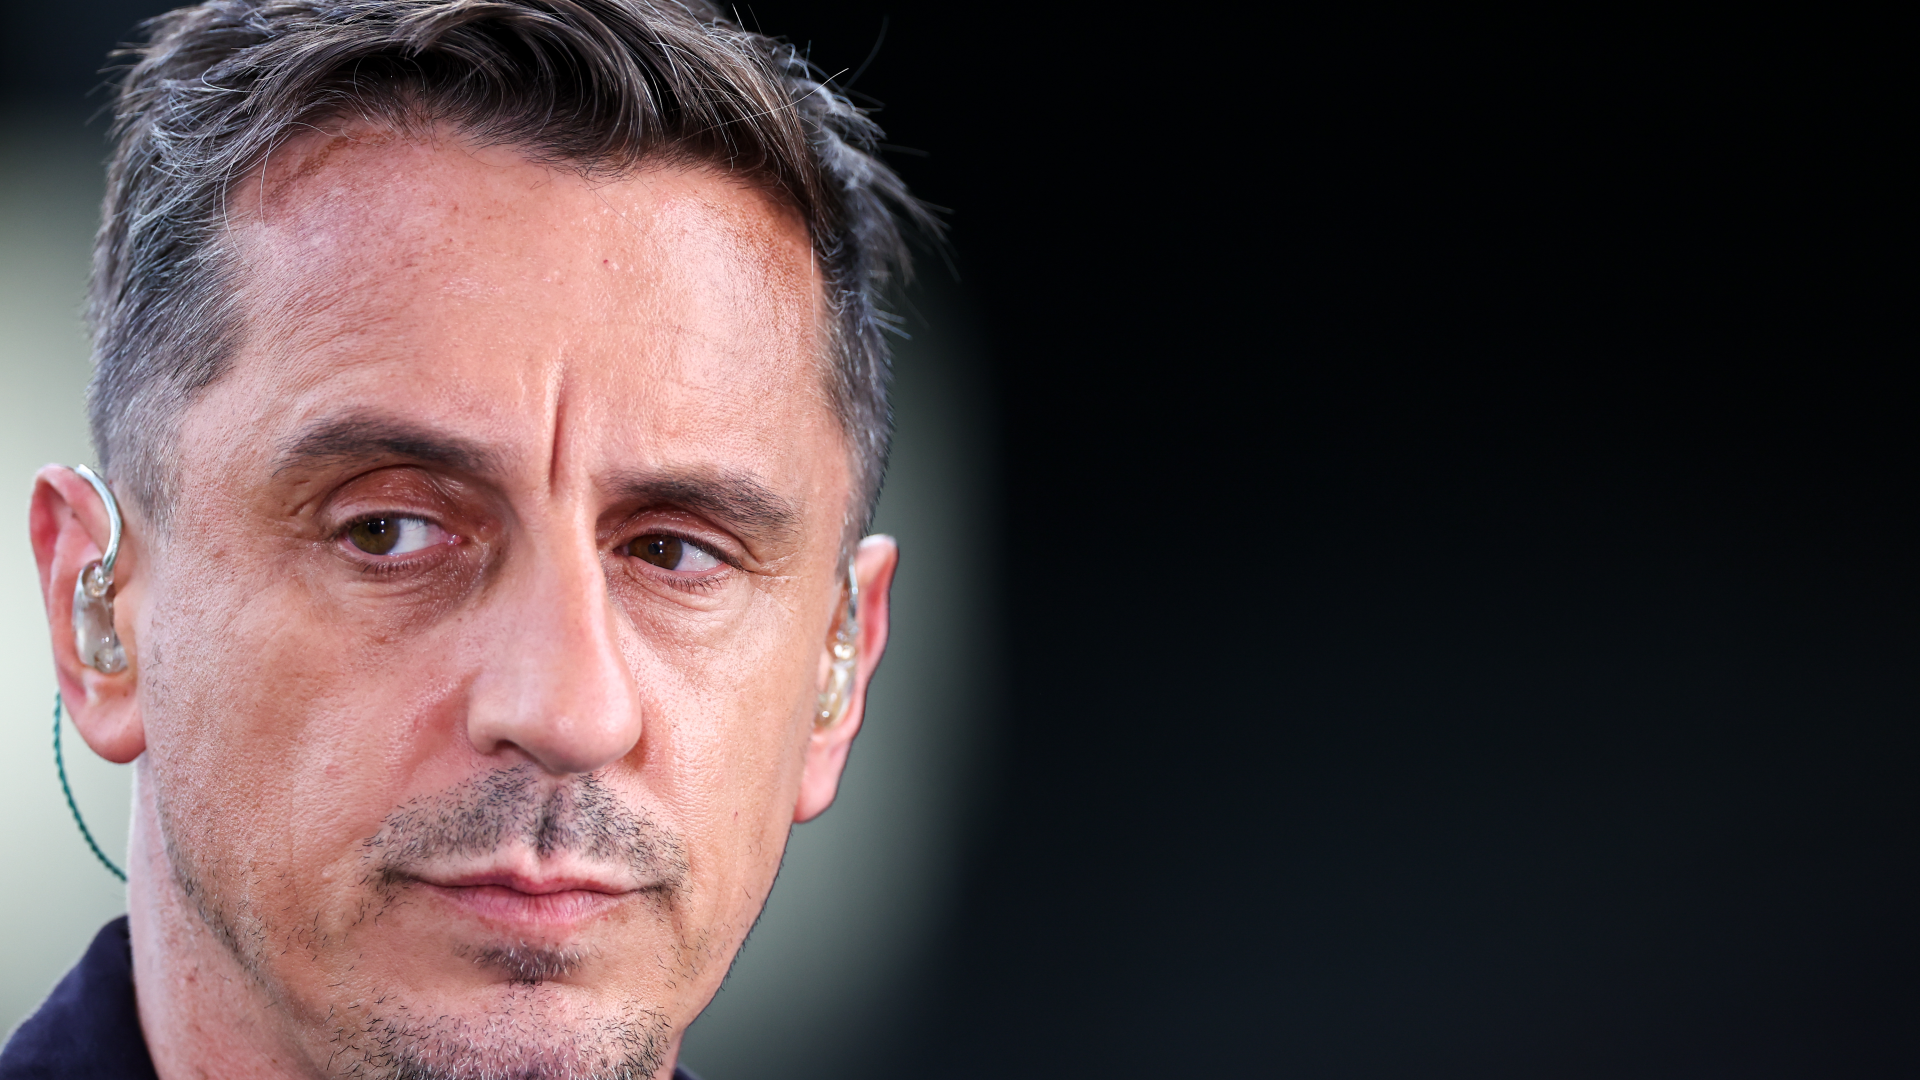 Disbelief of Gary Neville in the latest Manchester United reports